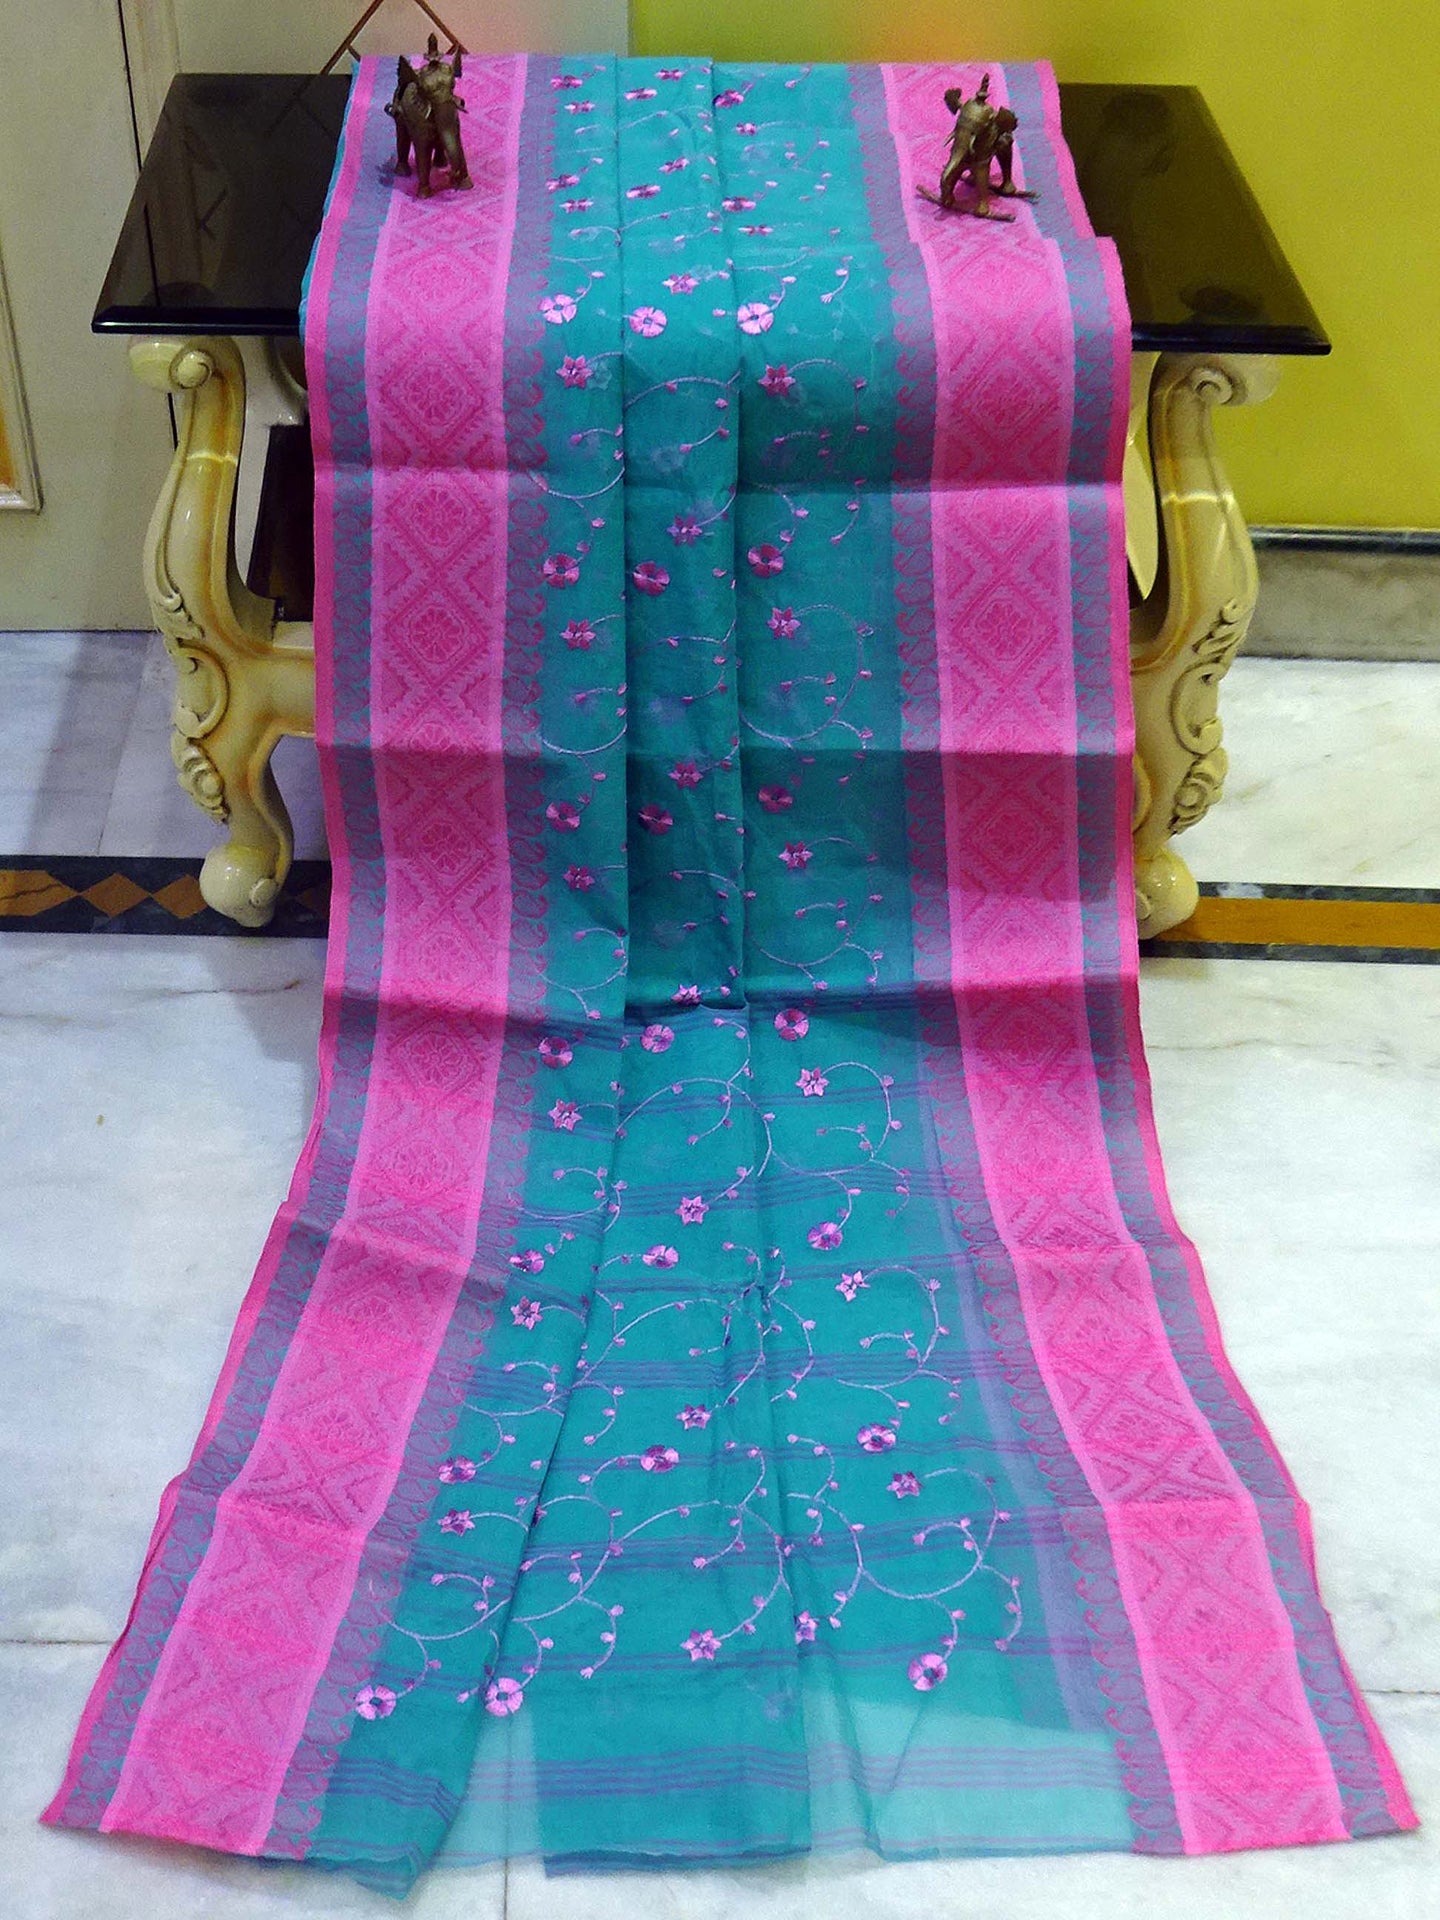 Bengal Handloom Cotton Saree with Floral Jaal Embroidery Work in Sea Green and Pink